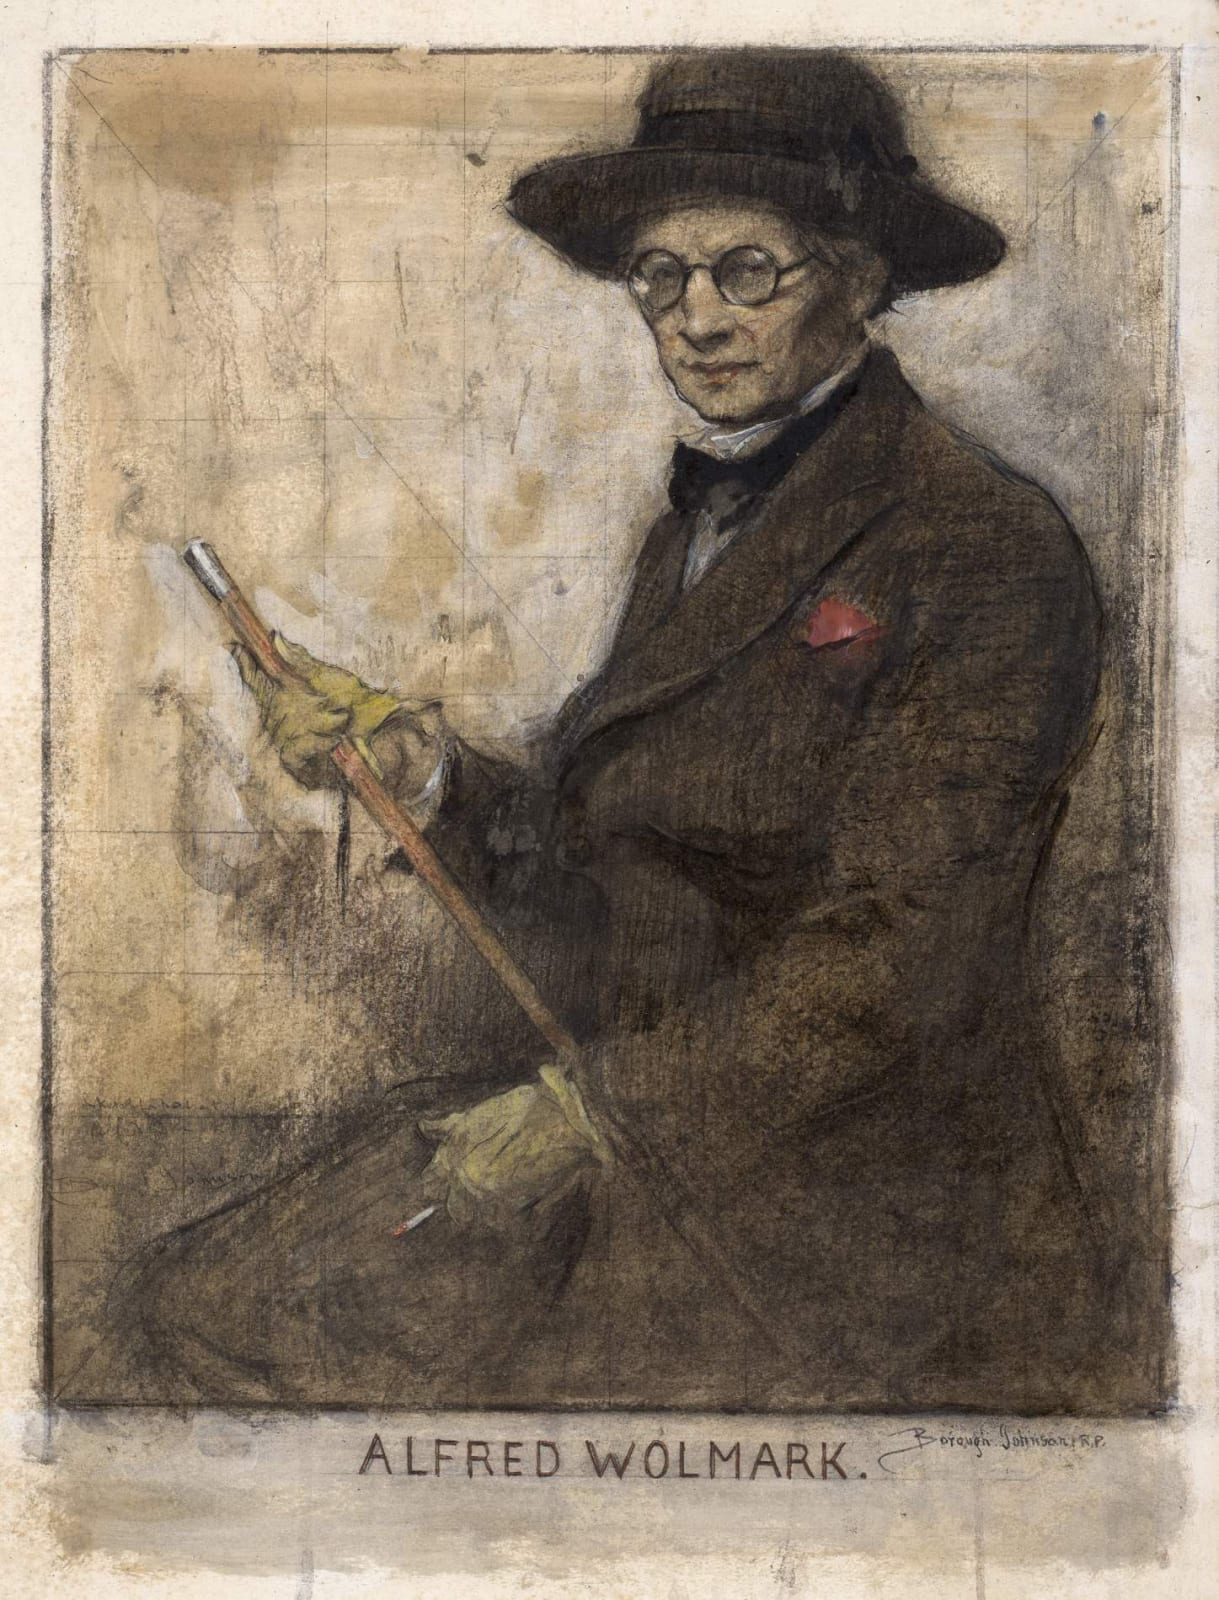 Ernest Borough Johnson (1866-1949) Portrait of Alfred Wolmark c.1915-20 Watercolour and pencil on paper 53 x 38 cm Ben Uri Collection © Ernest Borough Johnson estate To see and discover more about this artist click here